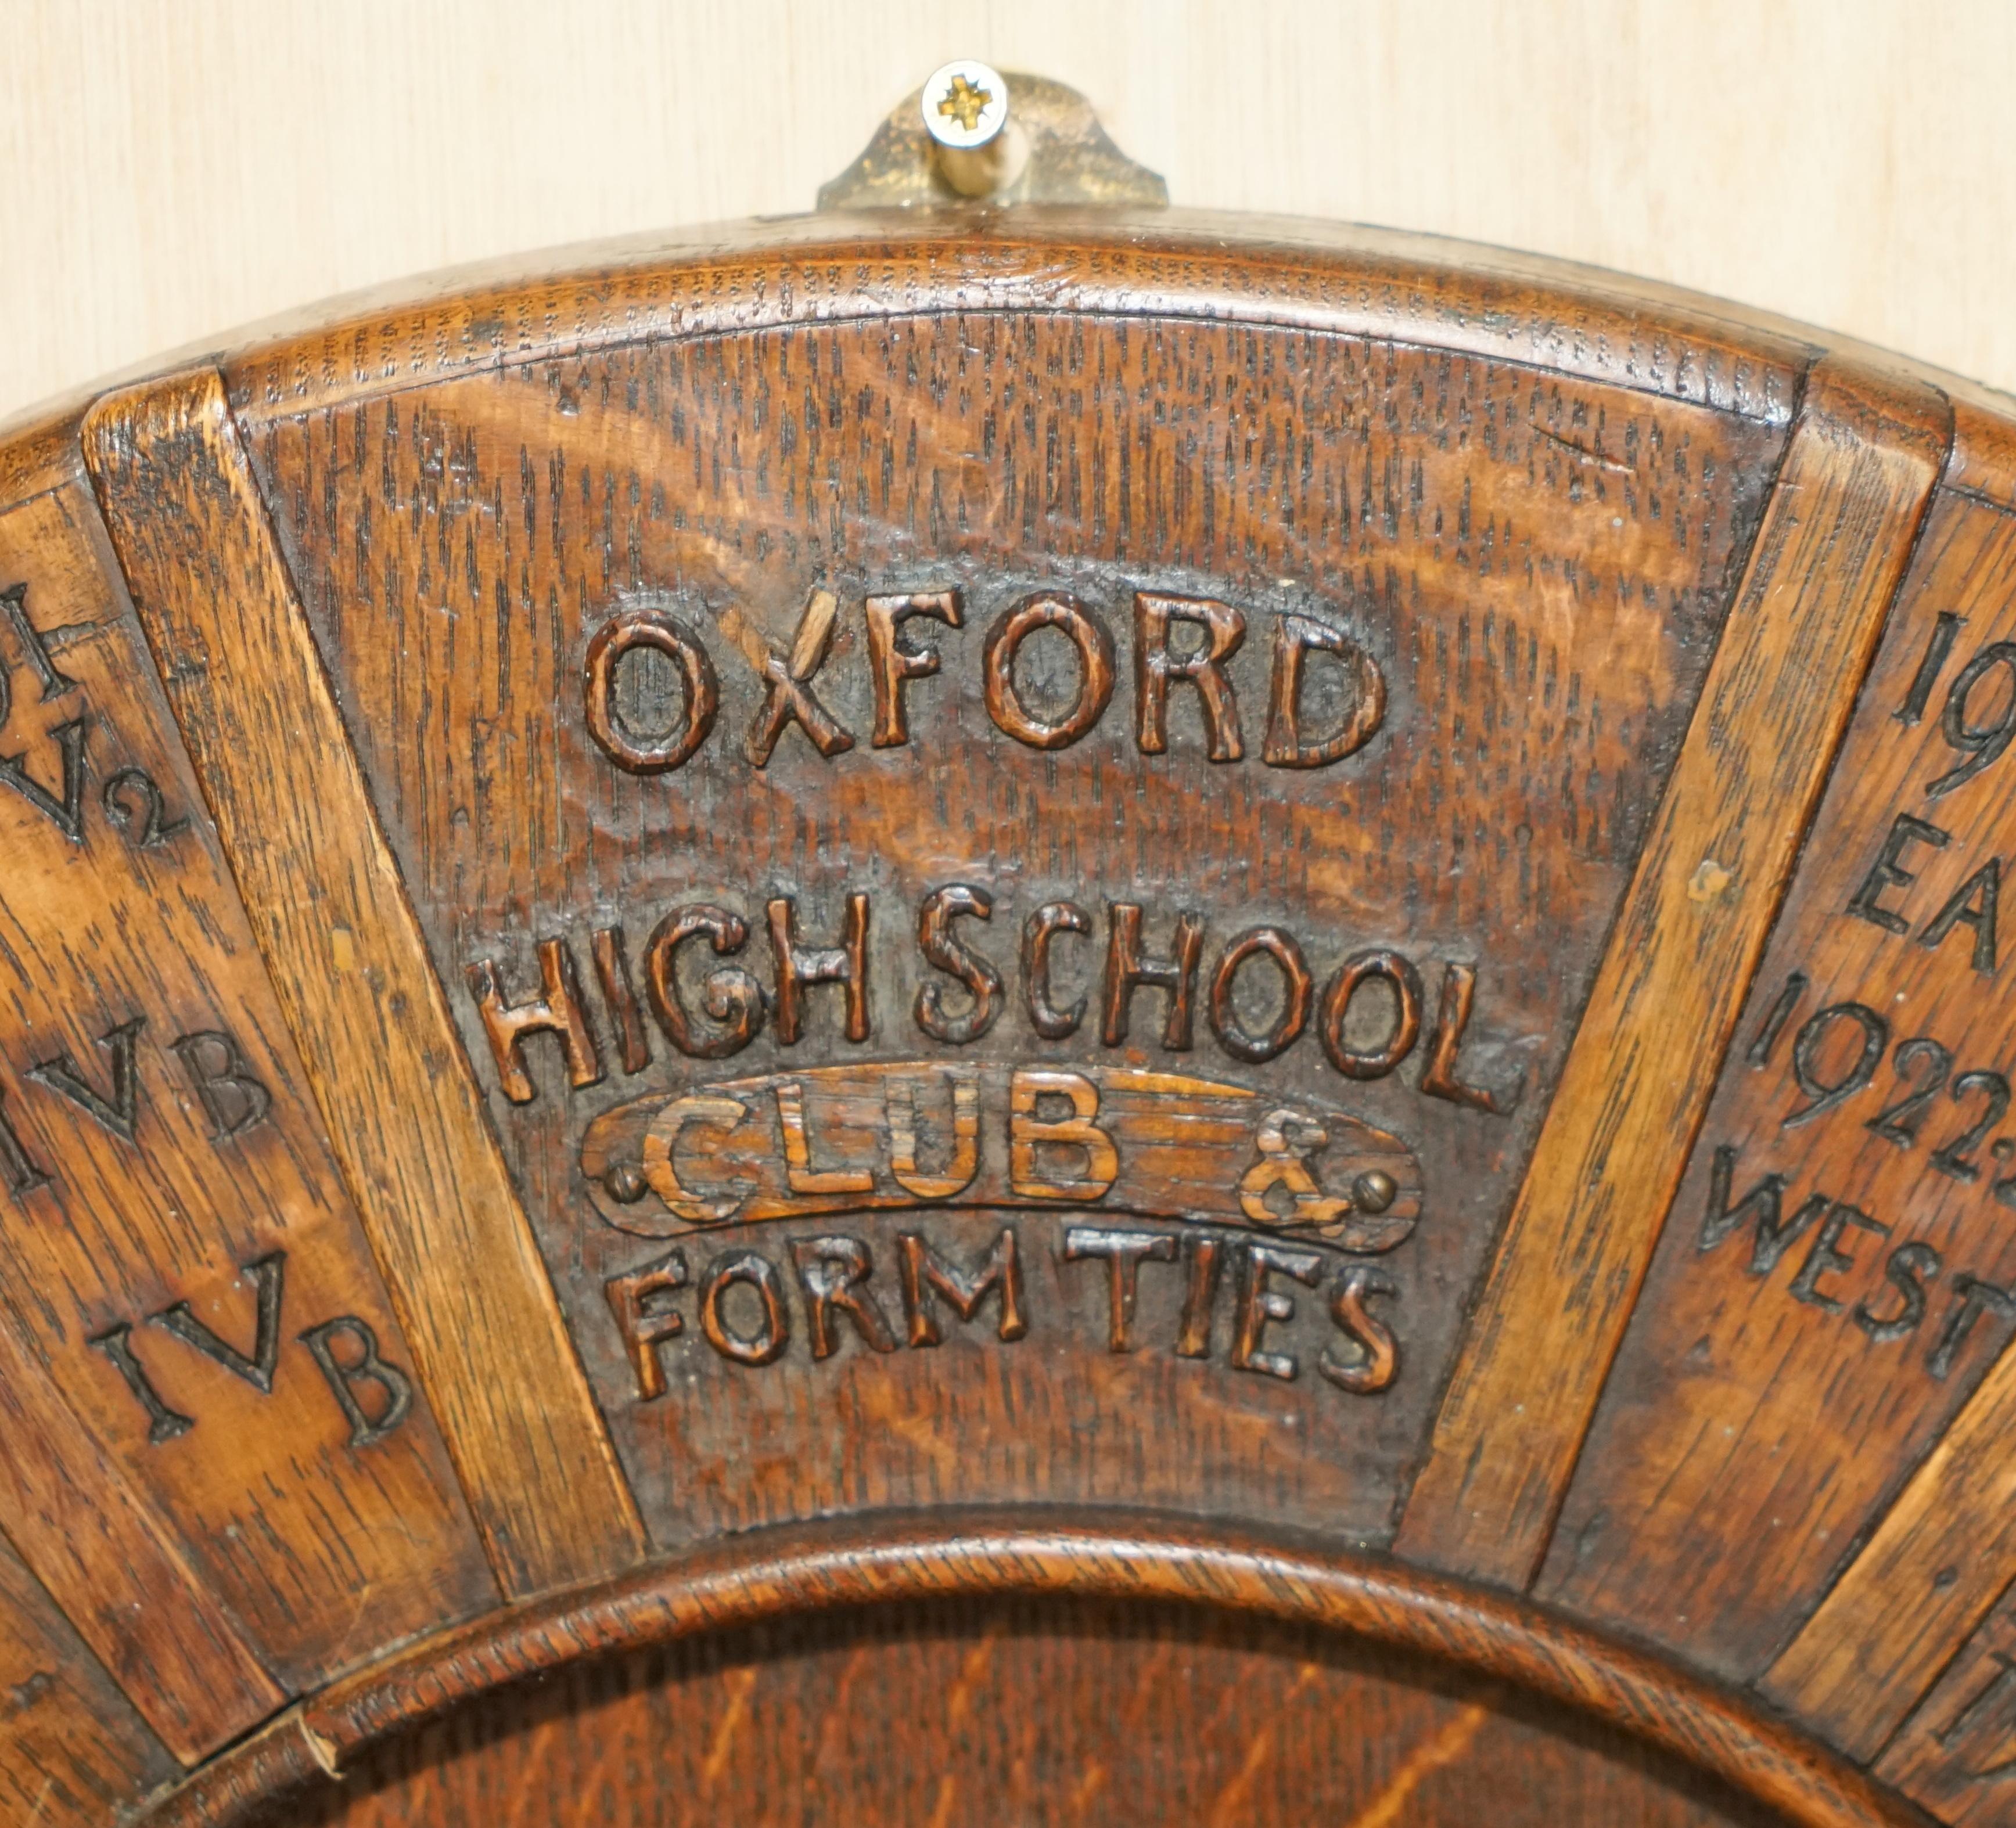 ANTIQUE OXFORD LADIES HiGH SCHOOL HOCKEY PRESENTATION WINNERS PLAQUE MUST SEE For Sale 4